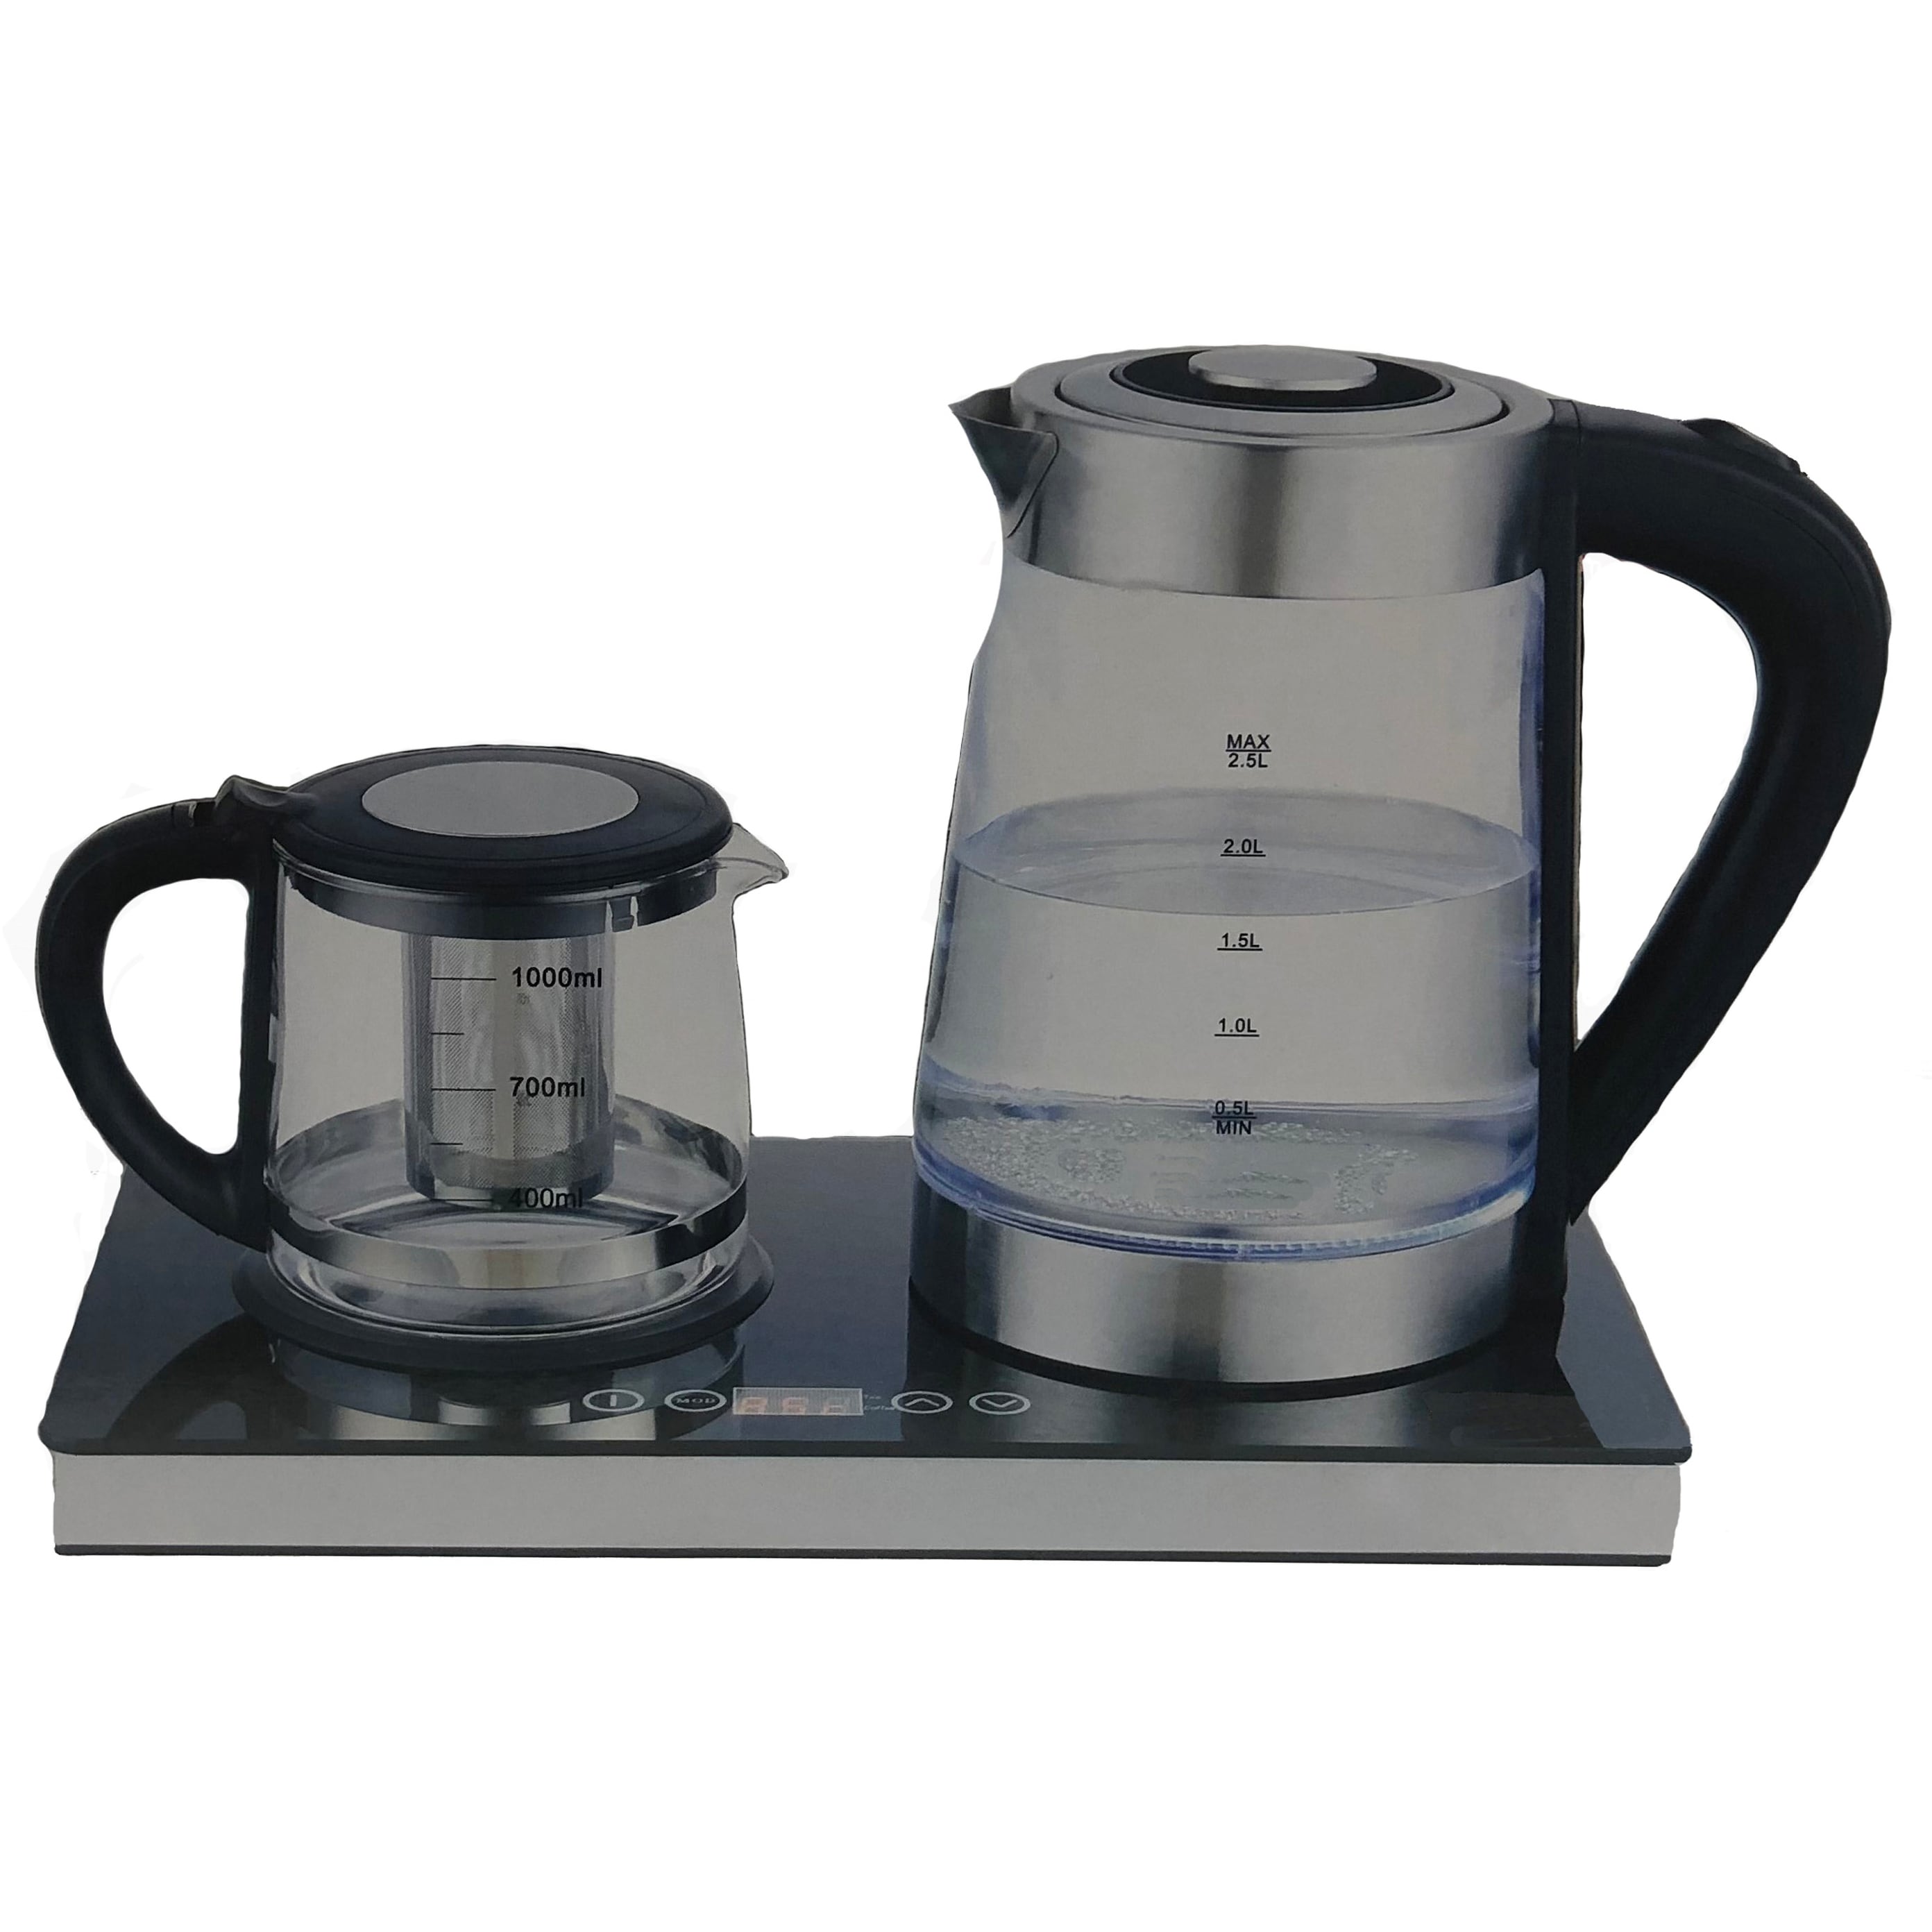 2.5L Whistling Kettle Stainless Steel Midnight Navy Blue Floral